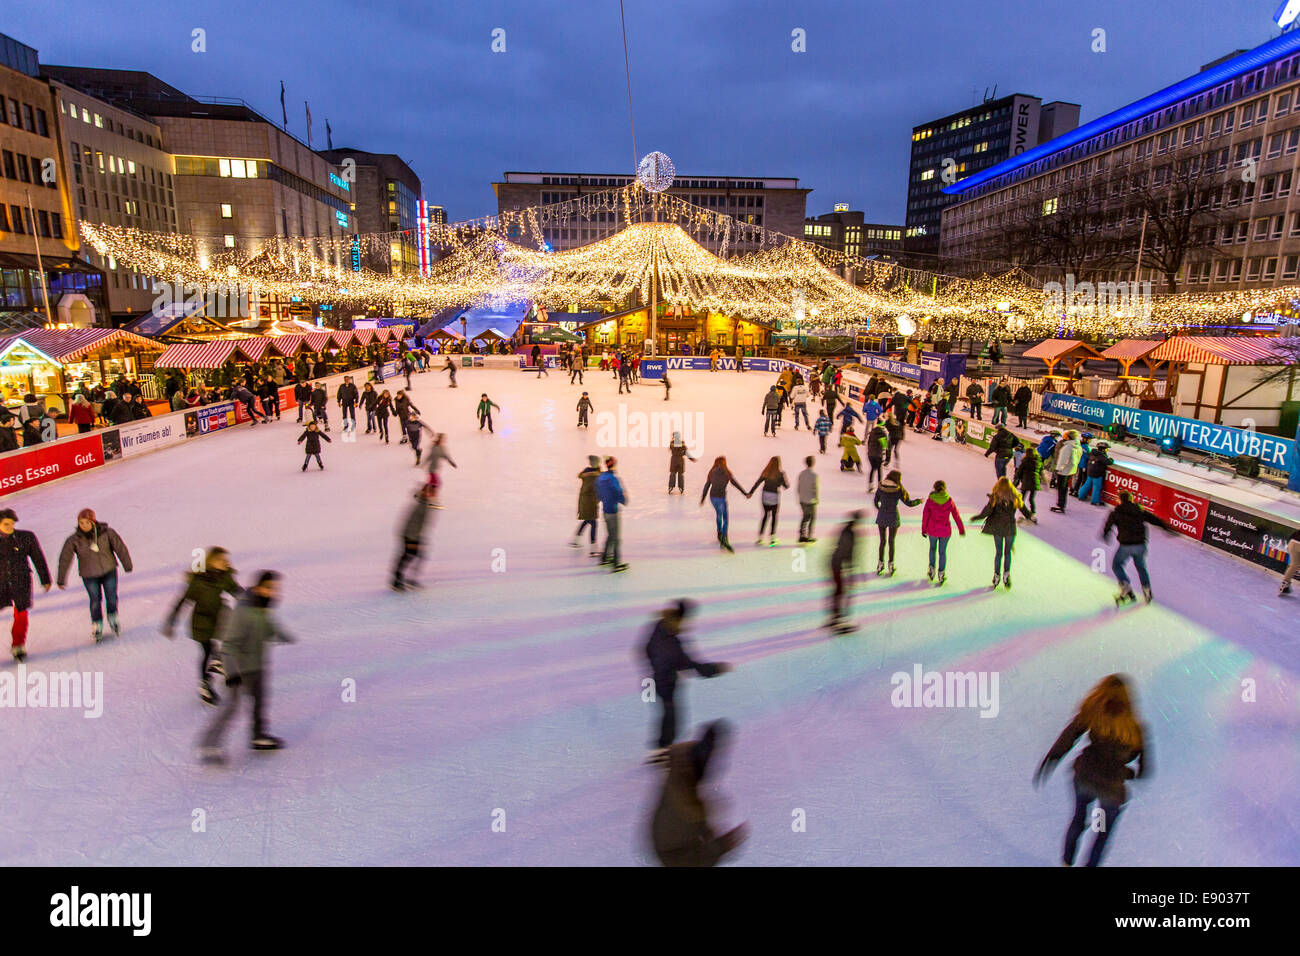 Dining on Ice, open air ice rink in the city center, Kennedy square, Essen, Germany Stock Photo